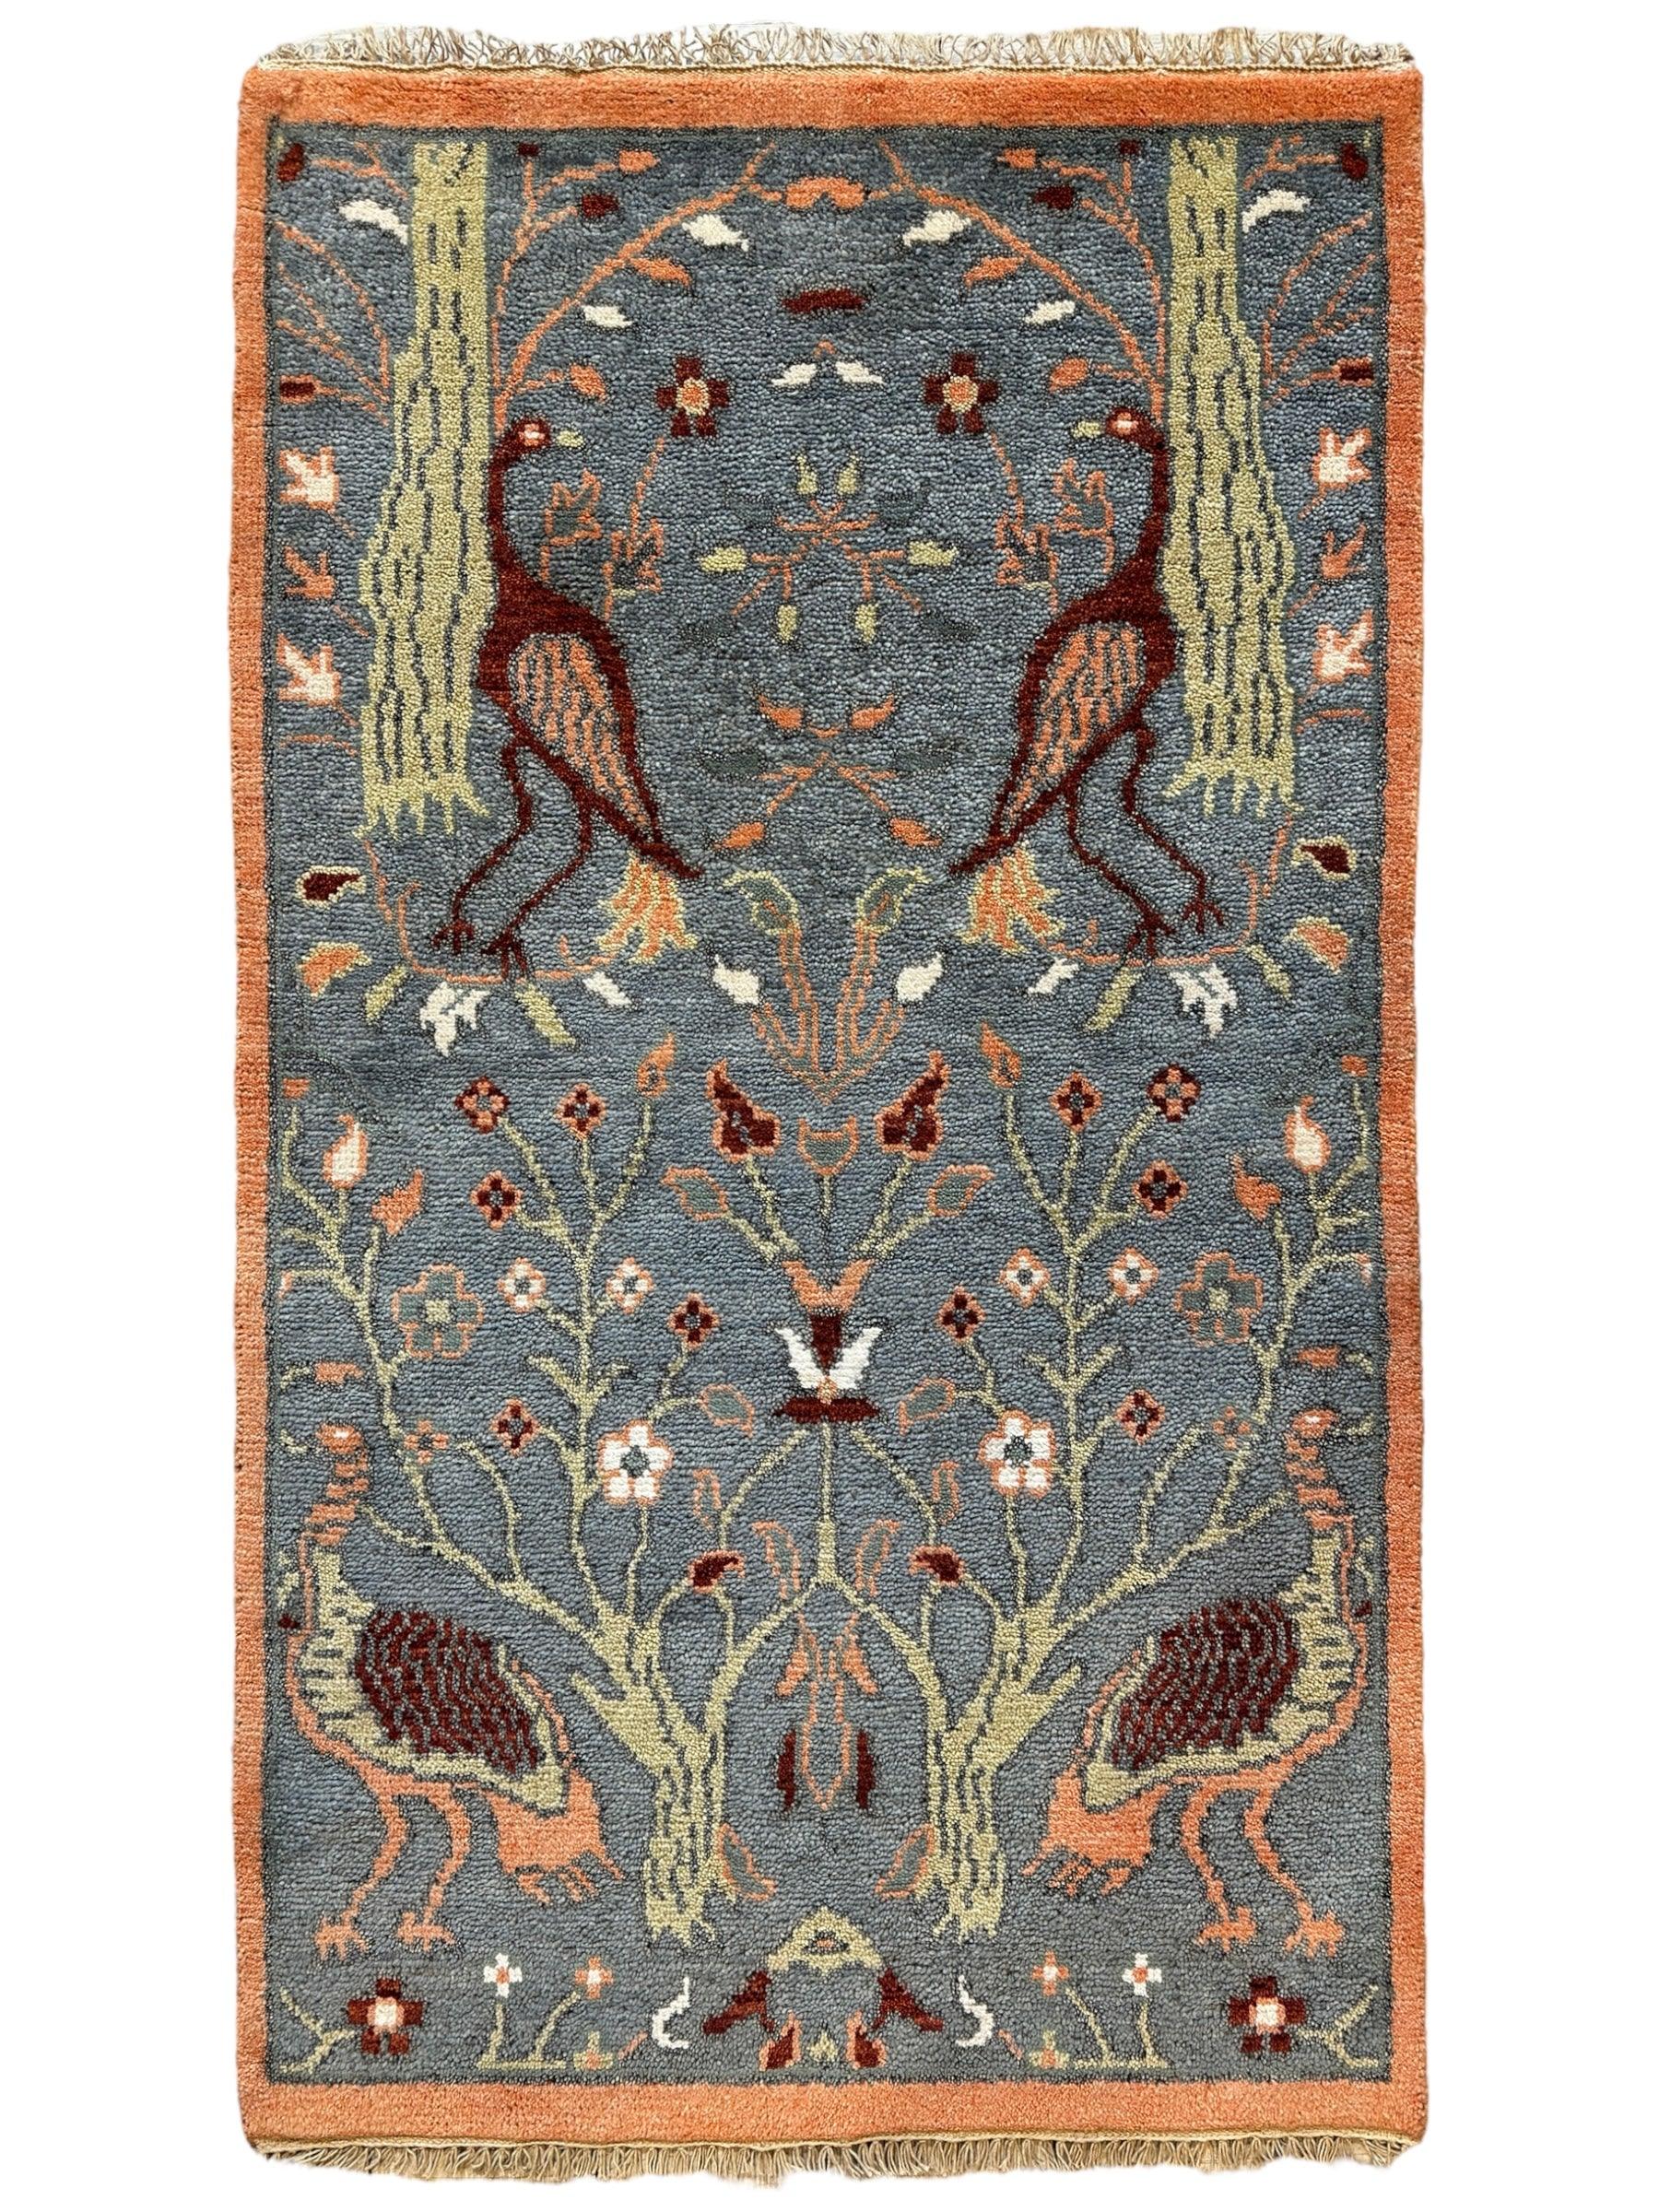 Fine Hand-Knotted Birds Pictorial Throw Rug 3’ x 5’